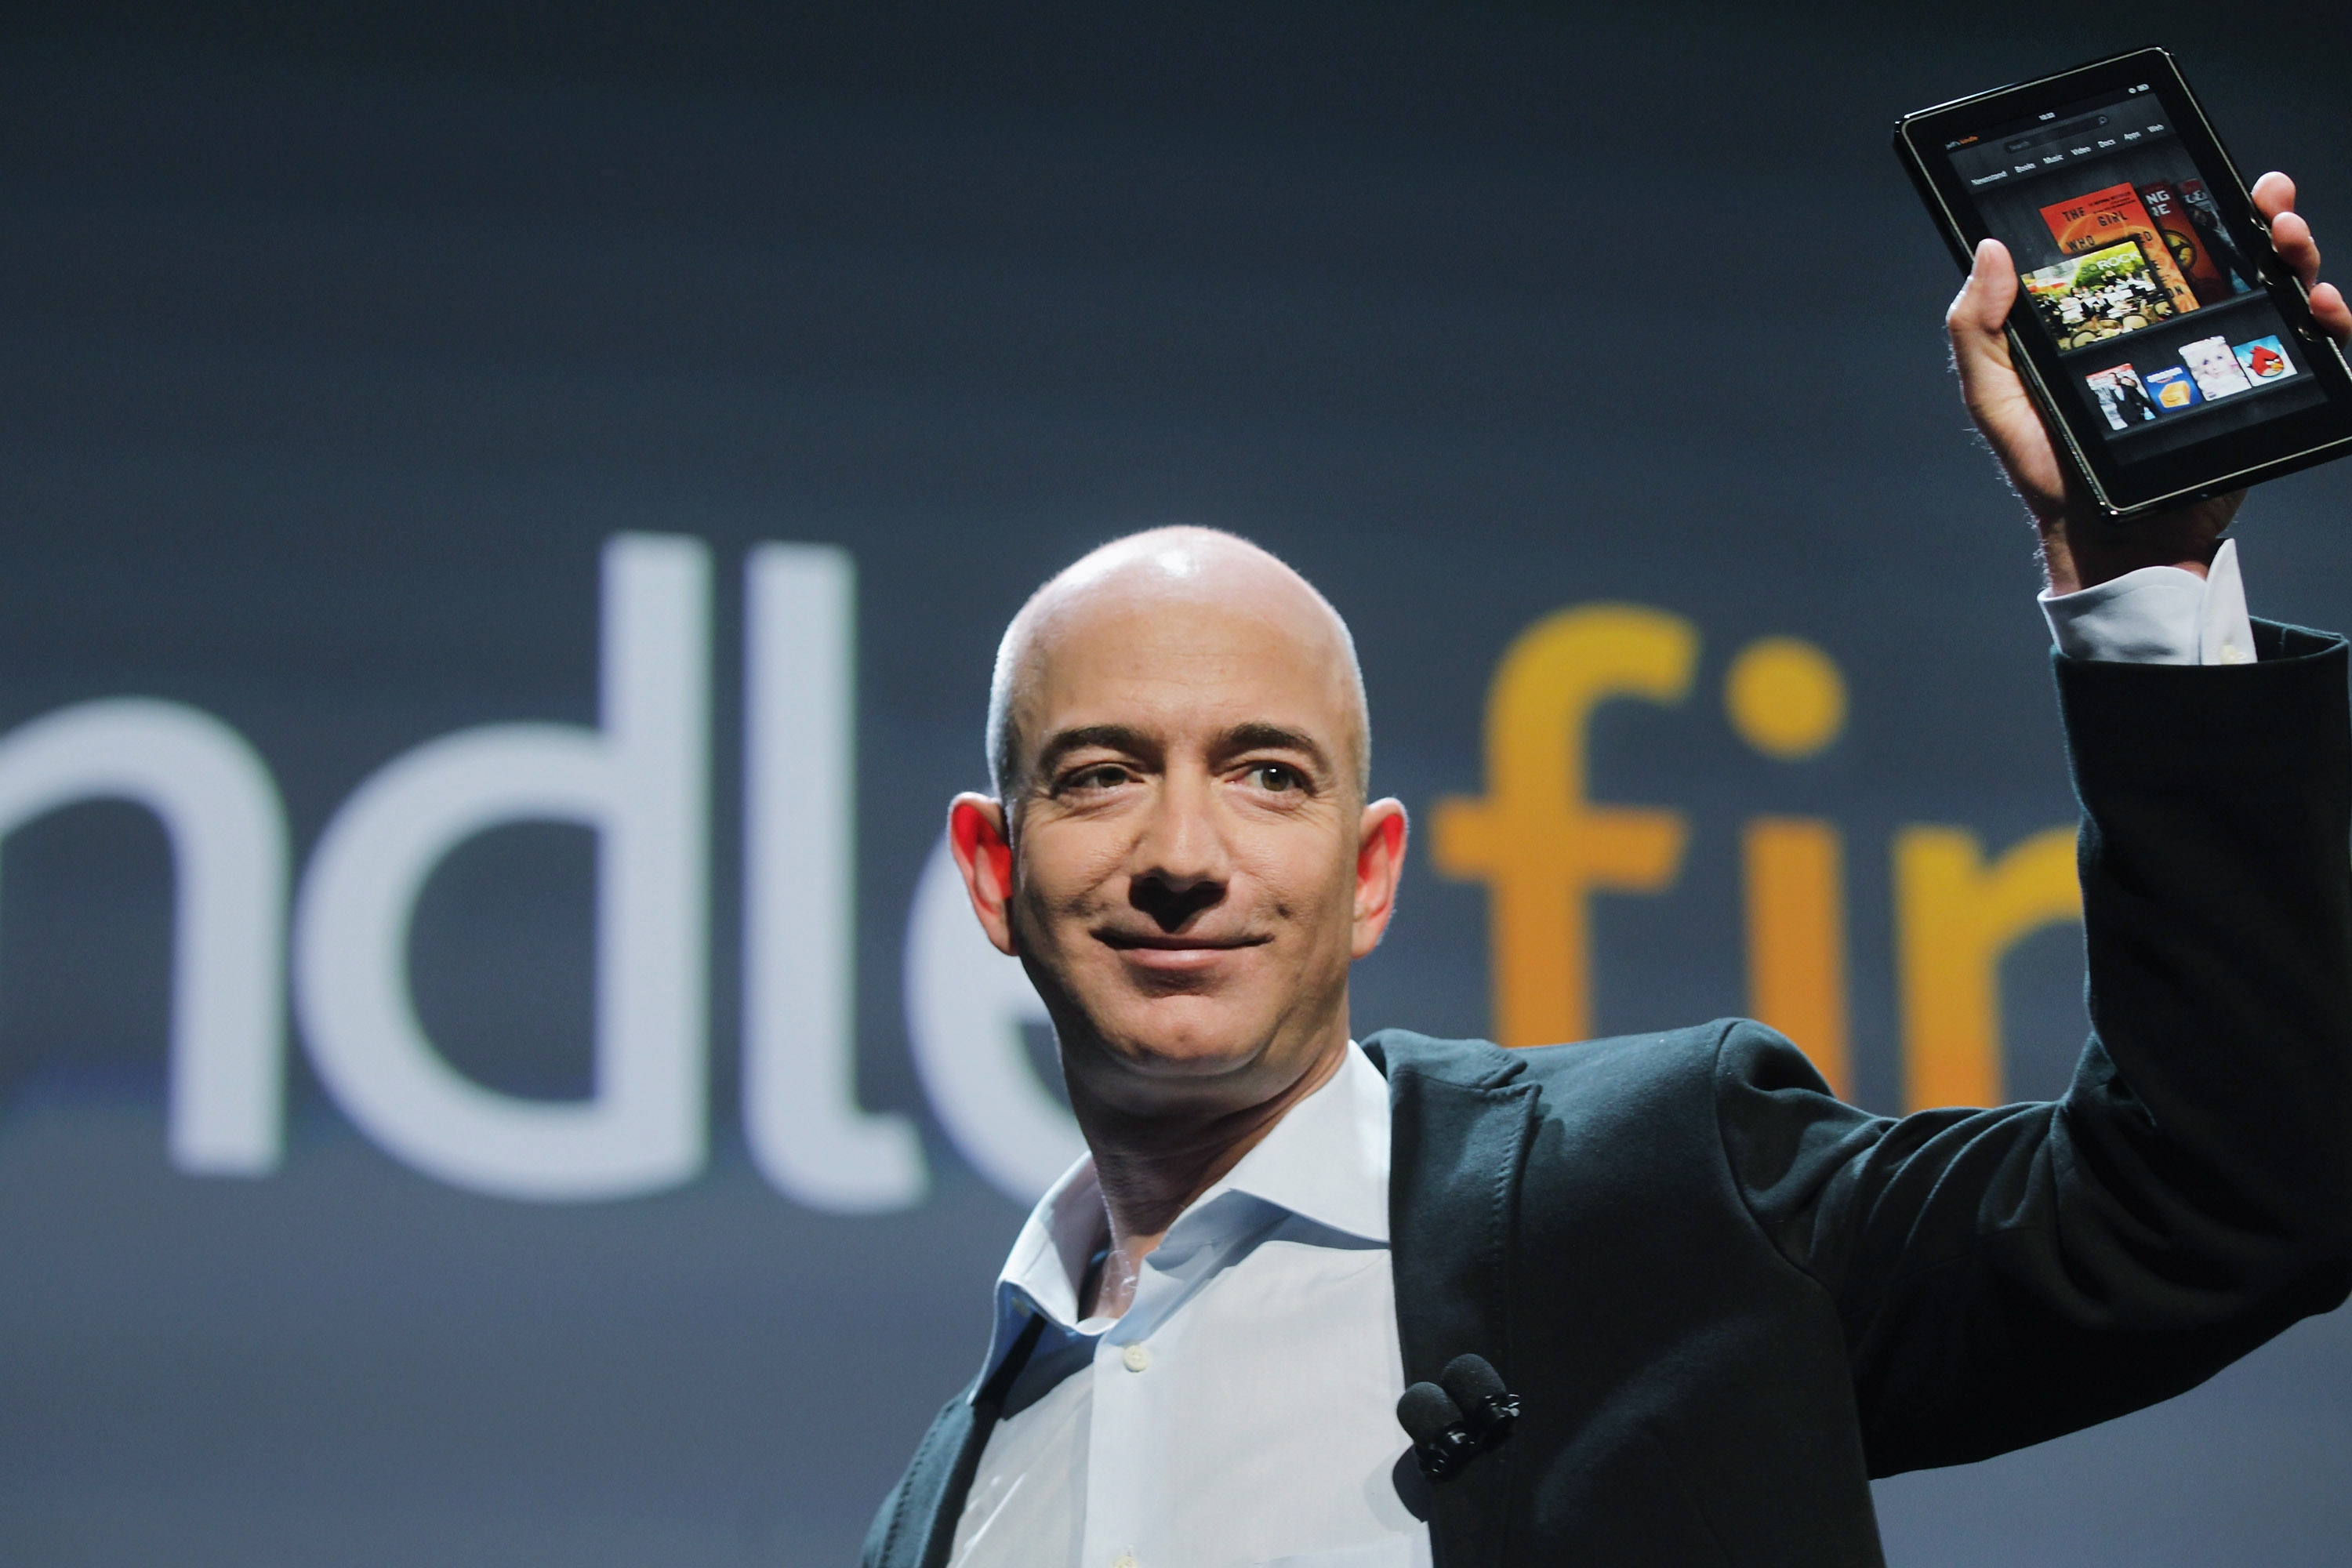 Amazon Introduces New Tablet At News Conference In New York